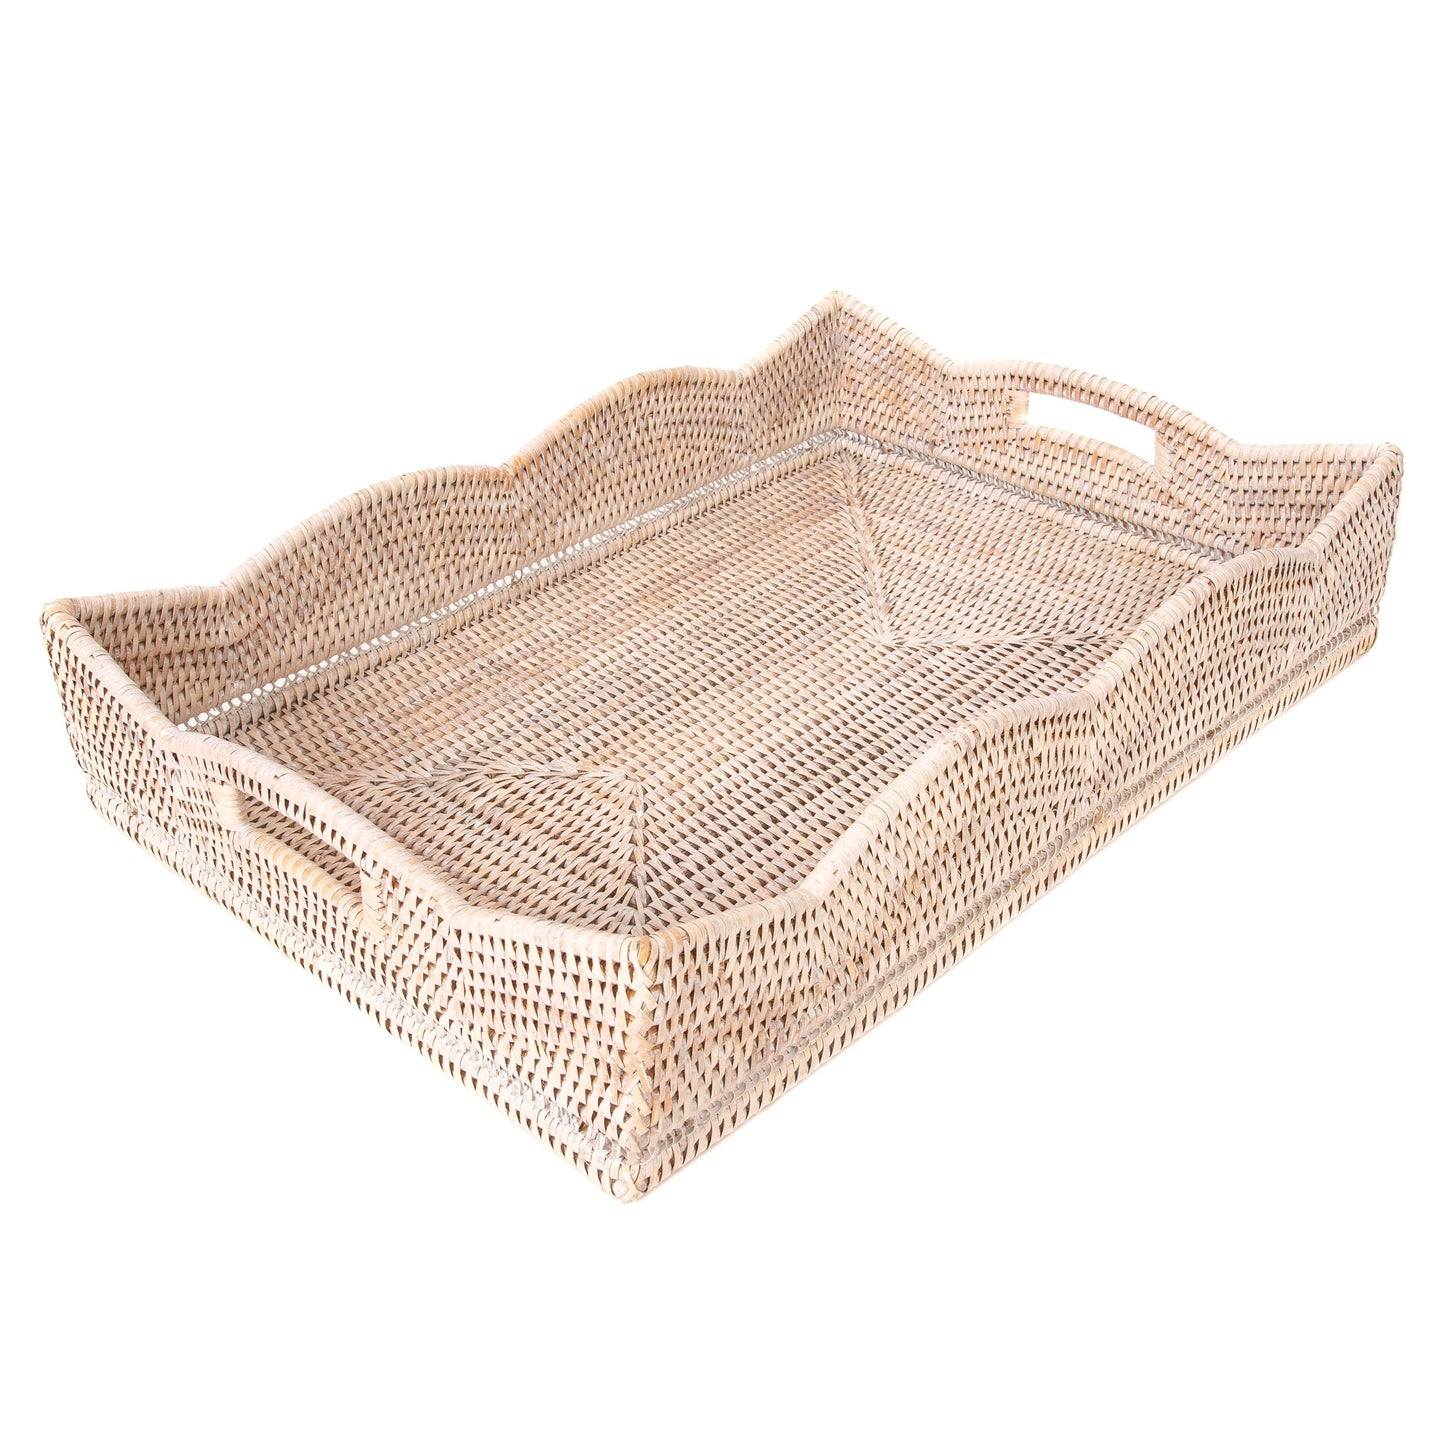 Artifacts Rattan Scallop Collection Rectangular Tray: White Wash